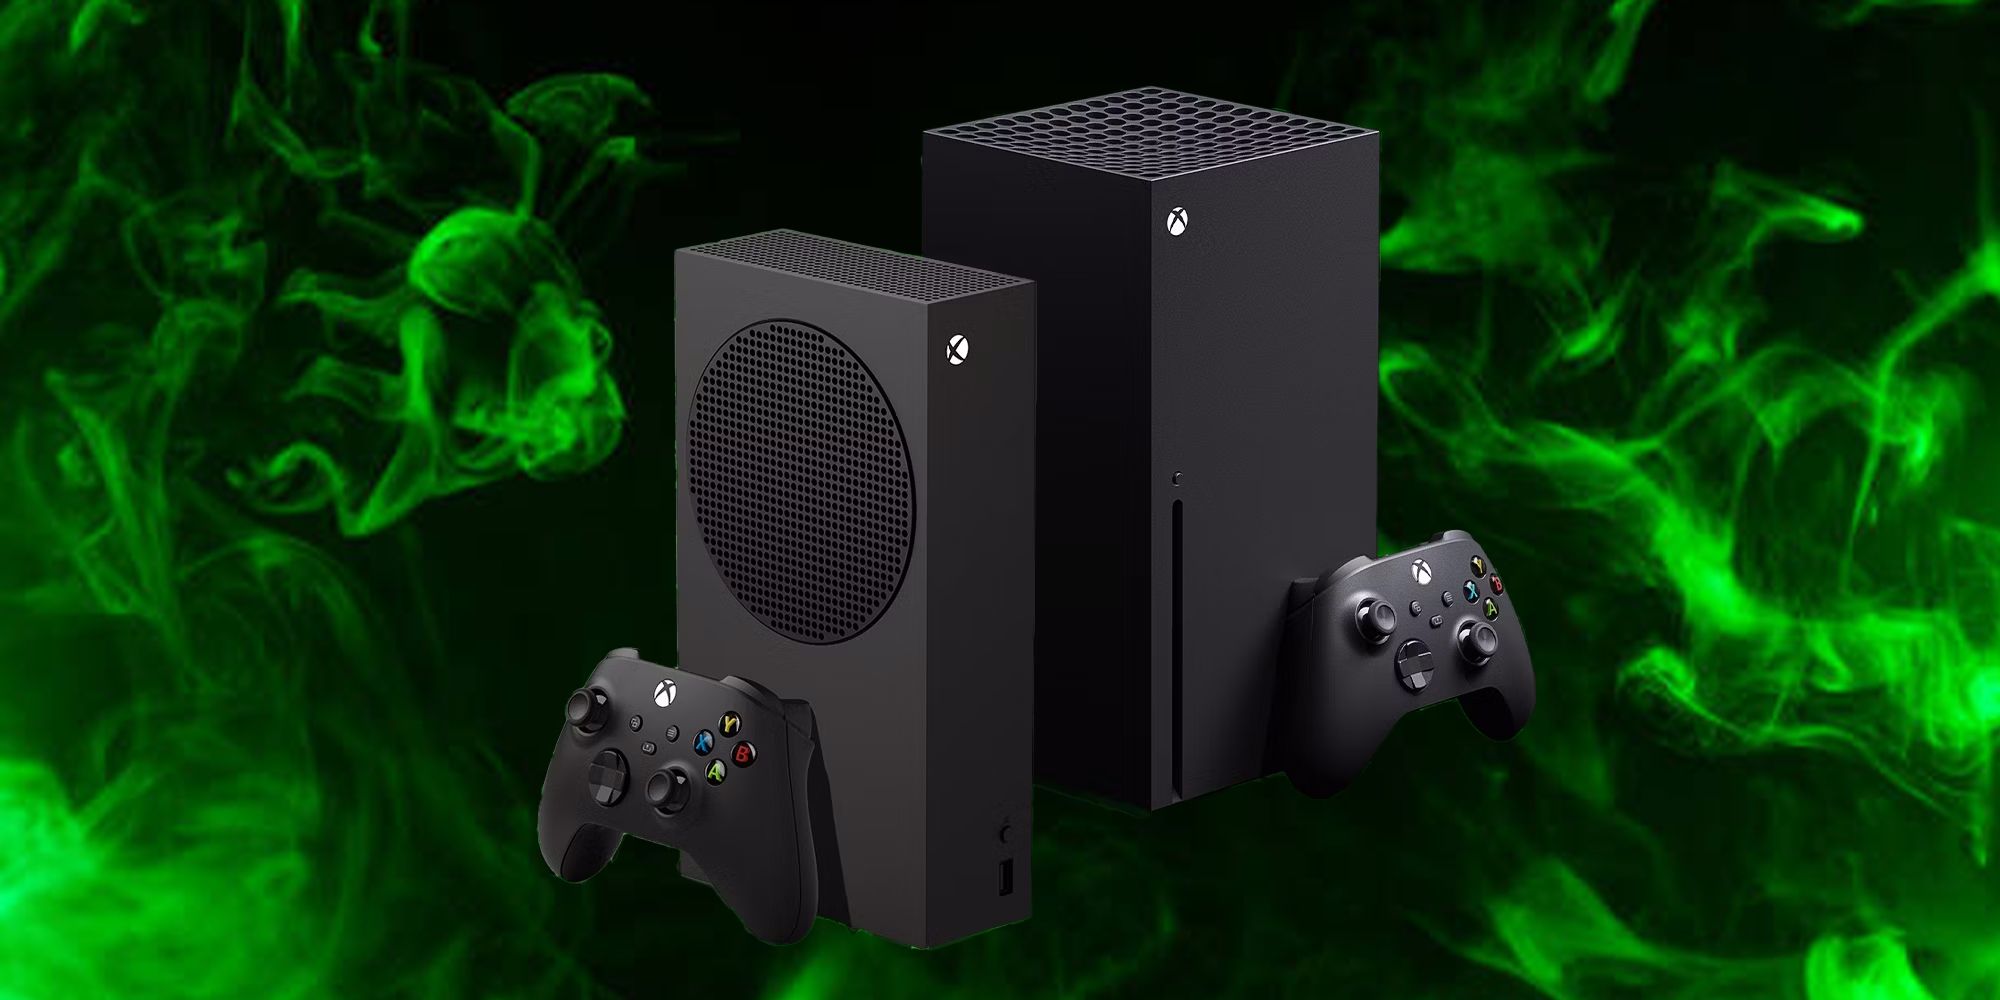 Xbox Is Removing One Major Feature May 30, So You Should Prepare